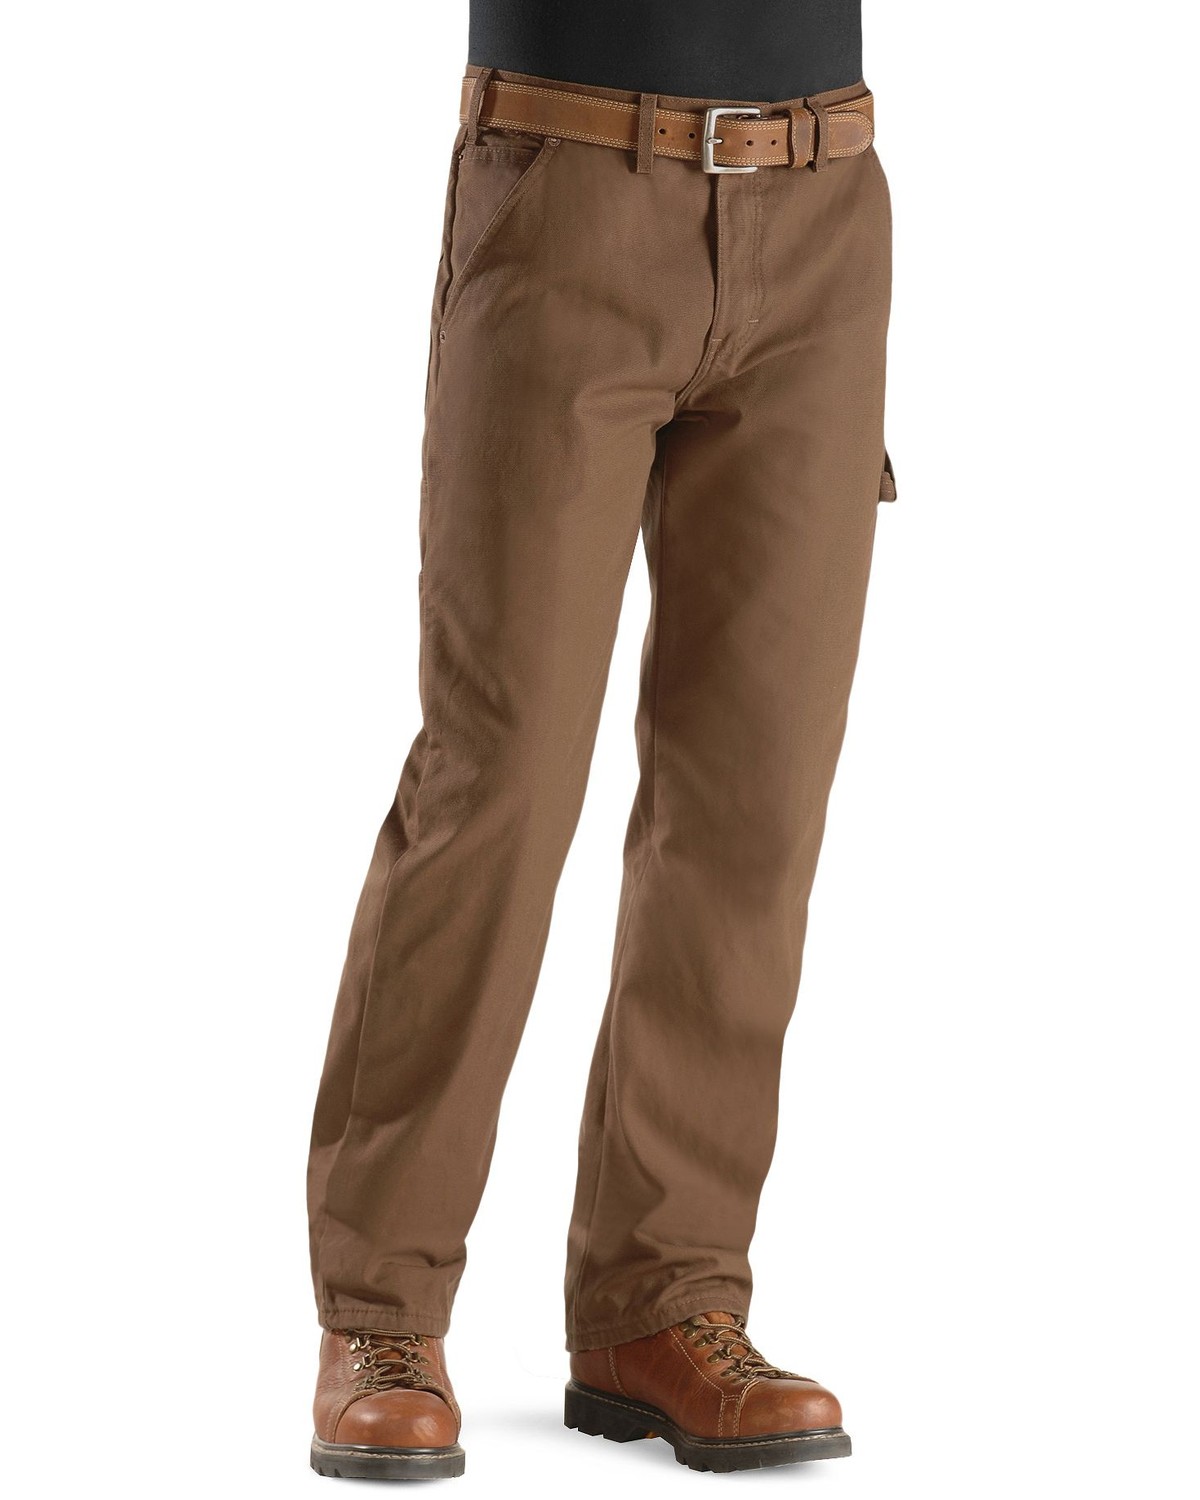 Dickies Twill Duck Flannel Lined Carpenter Work Pants | Sheplers